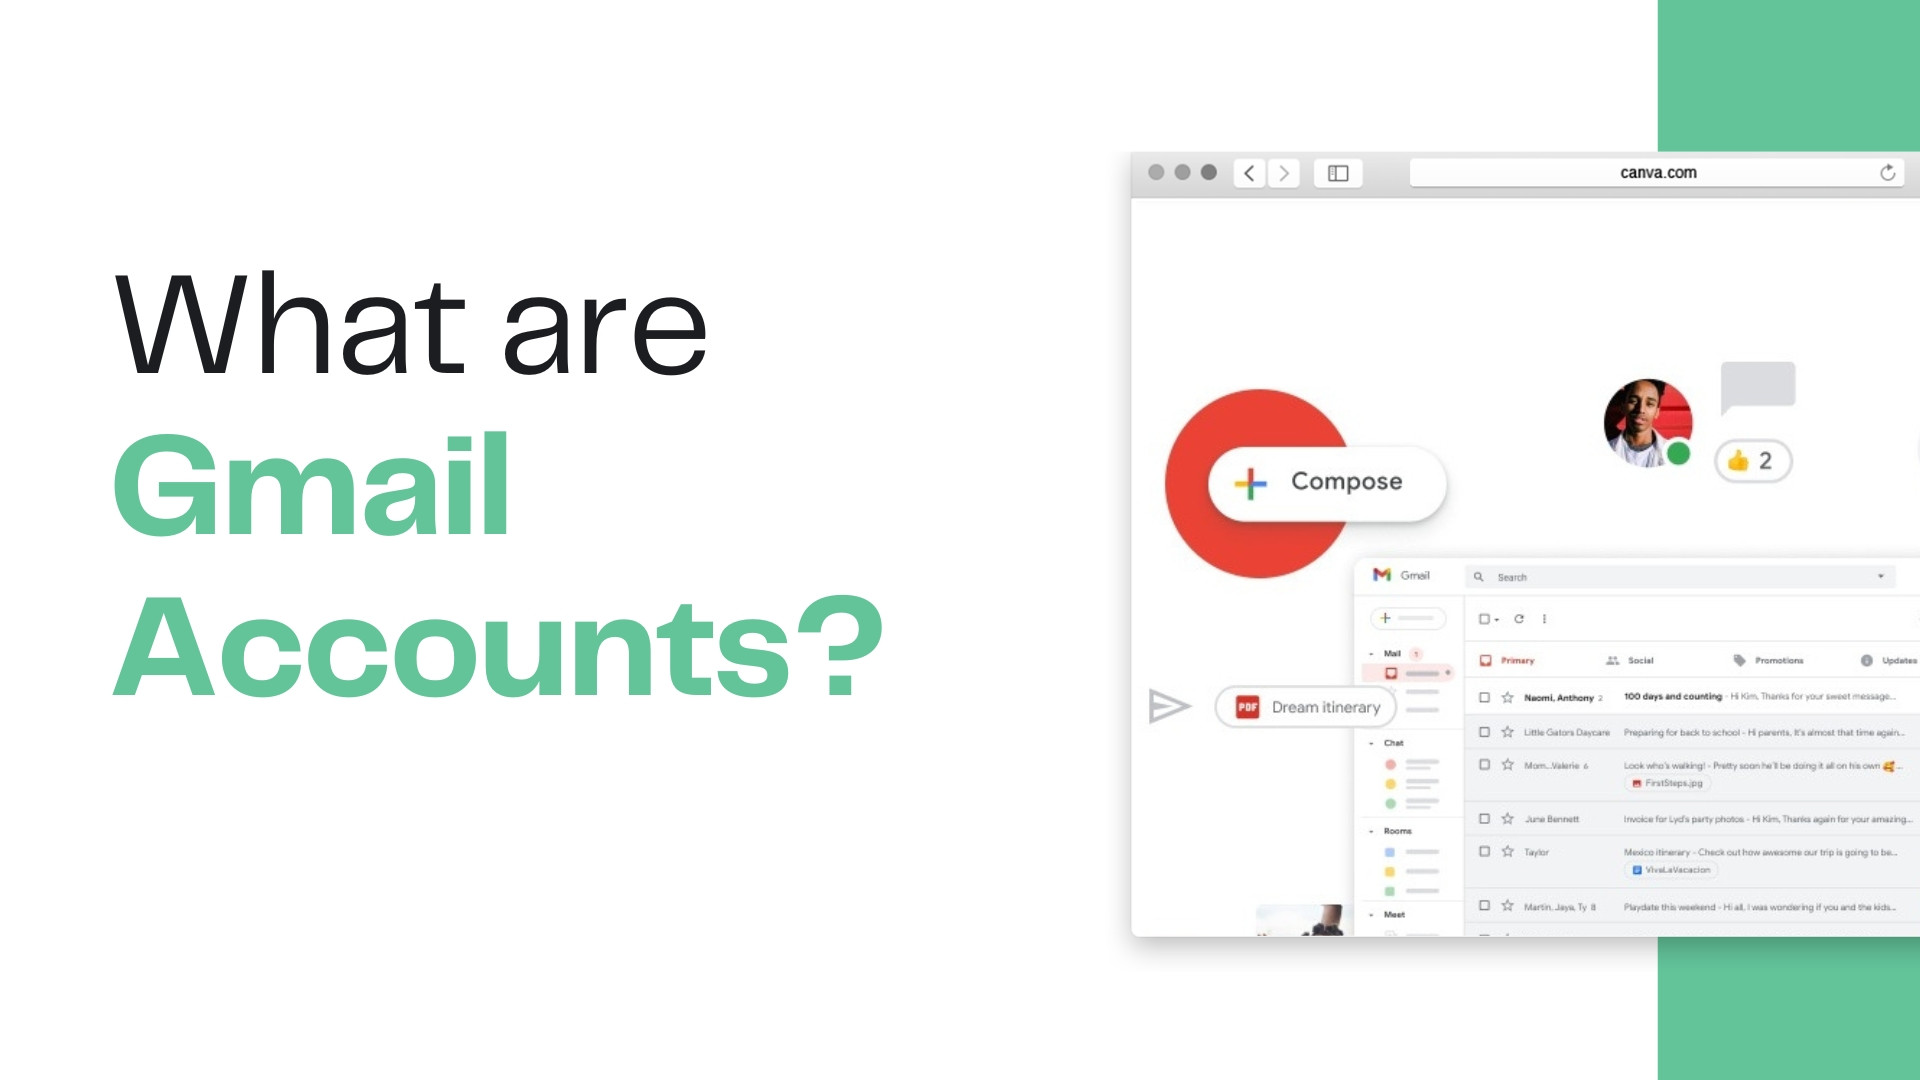 What are Gmail Accounts?